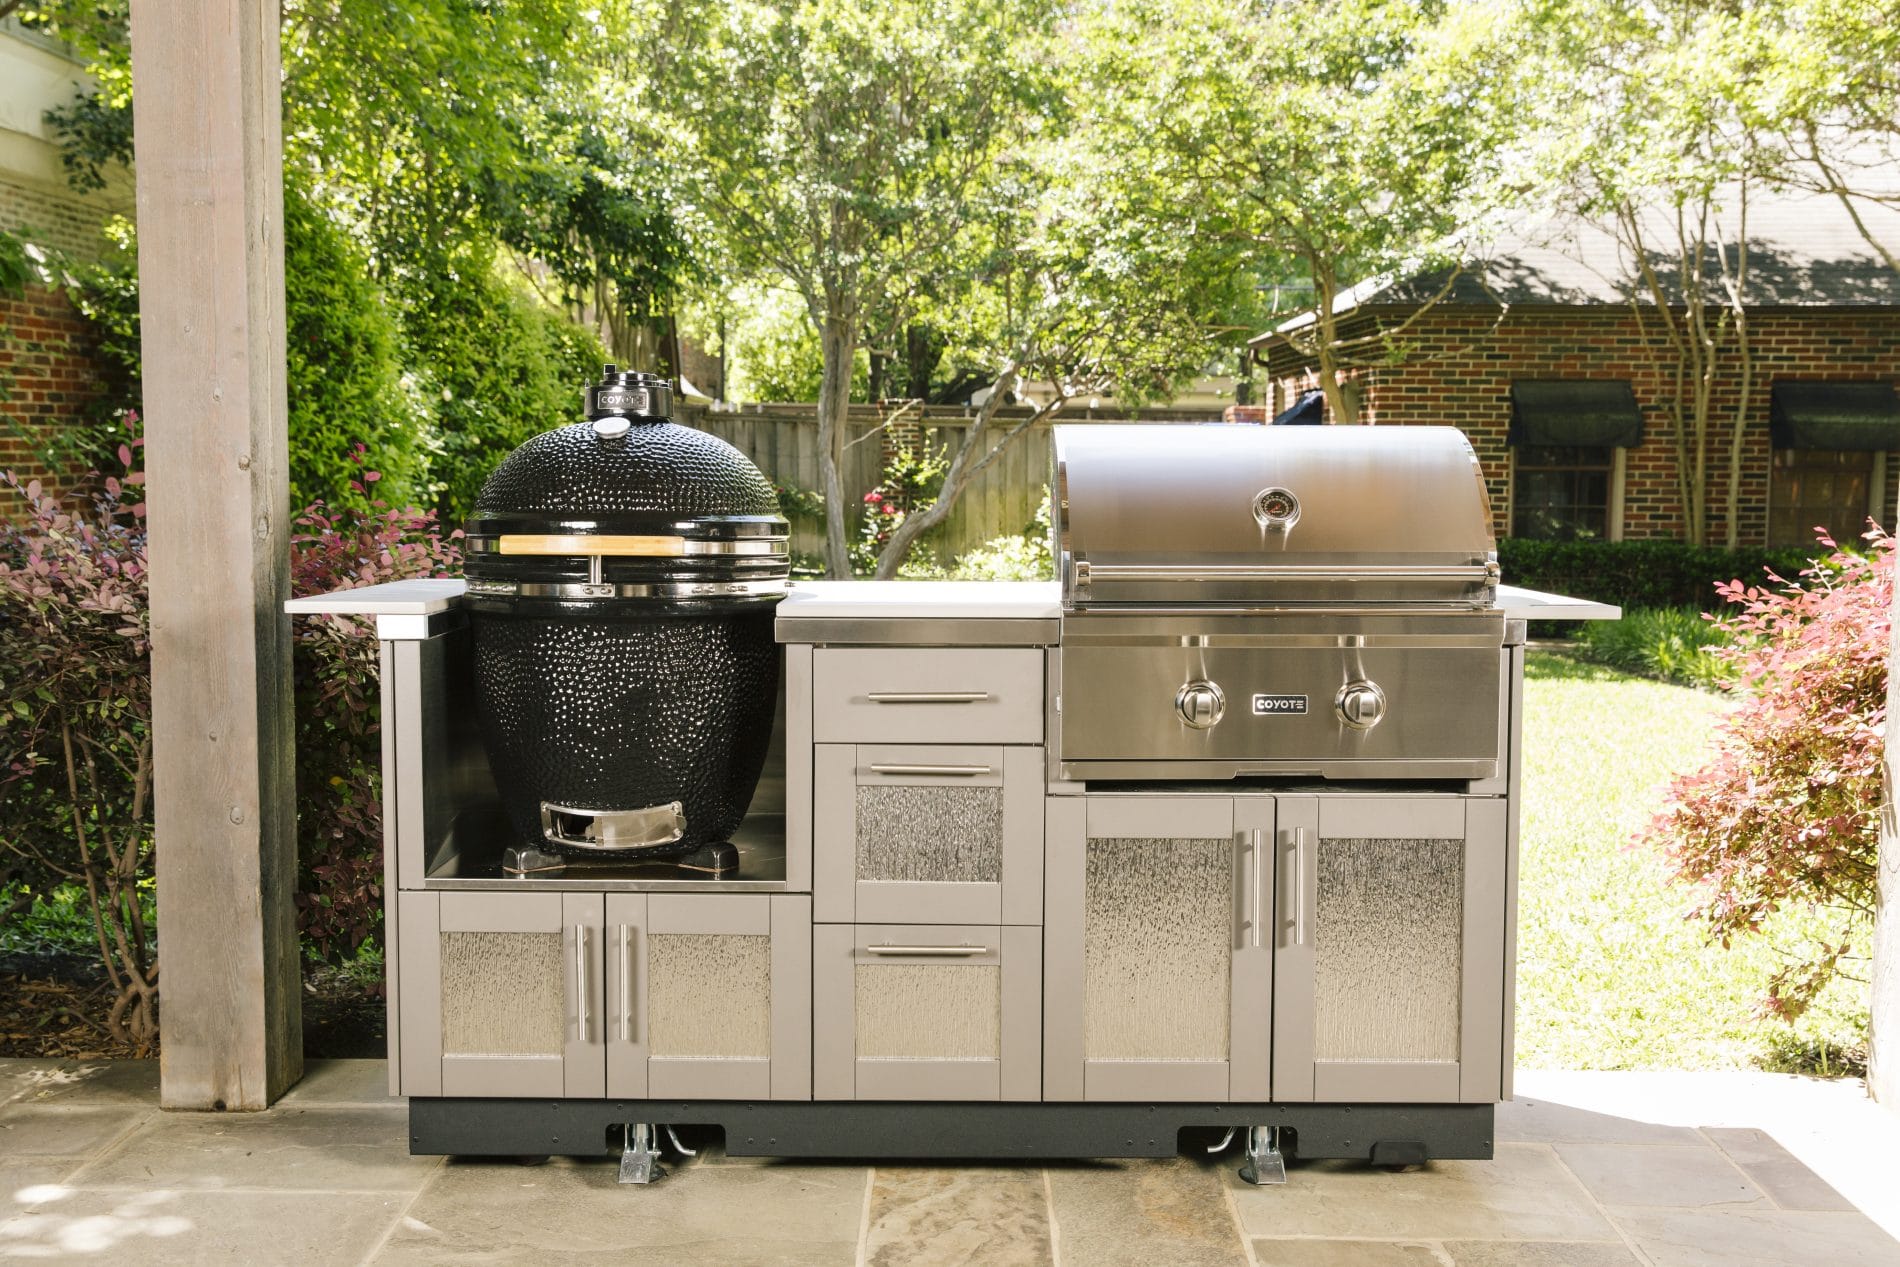 Coyote Island Bar with Built-In Grill and Asado Smoker